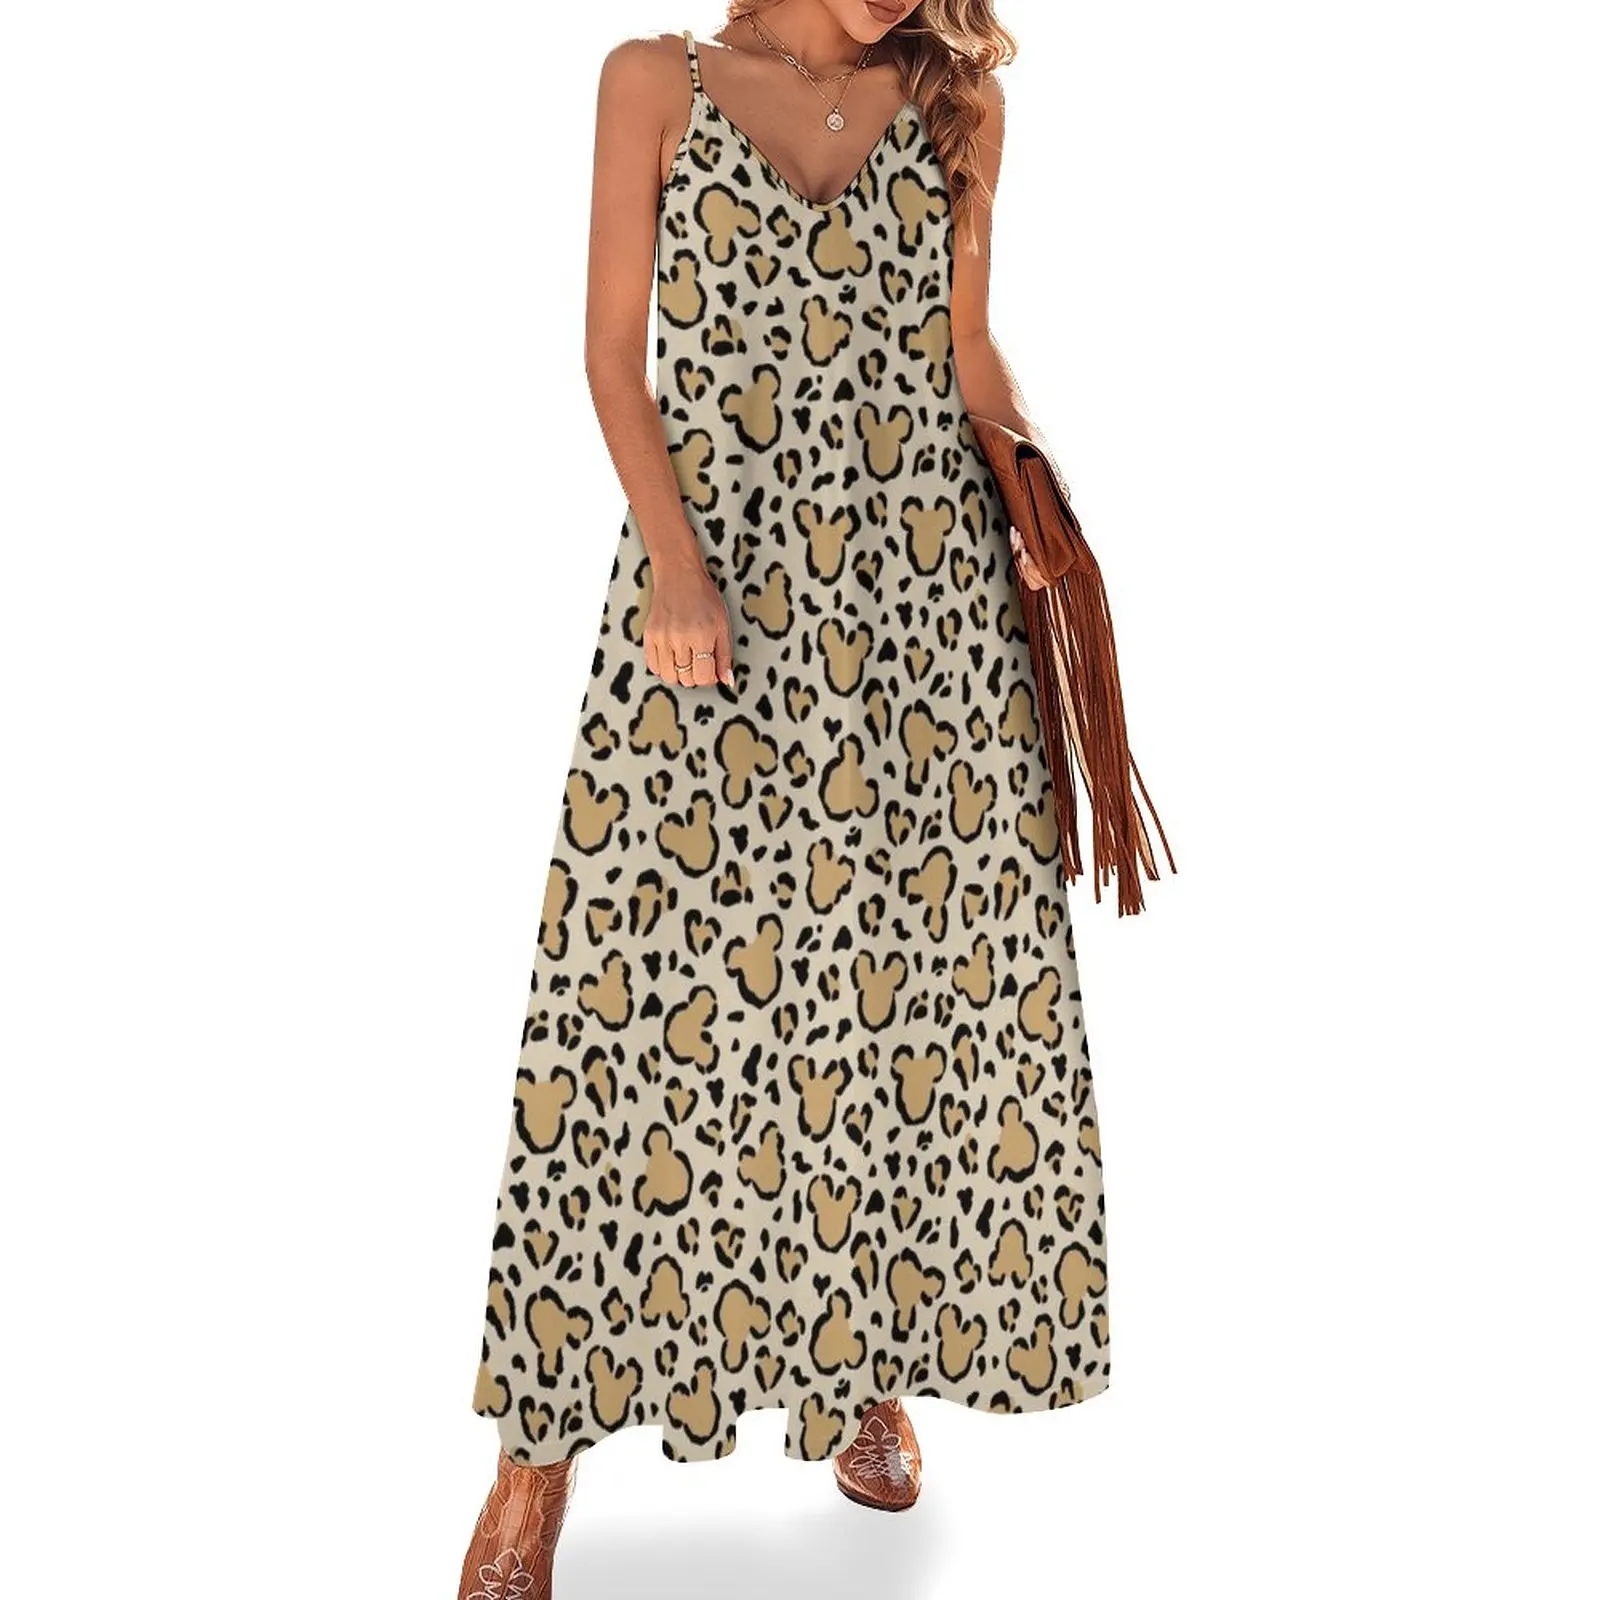 

Mouse Ears Animal Print Sleeveless Dress dresses for special events womans clothing cute dress Long dresses